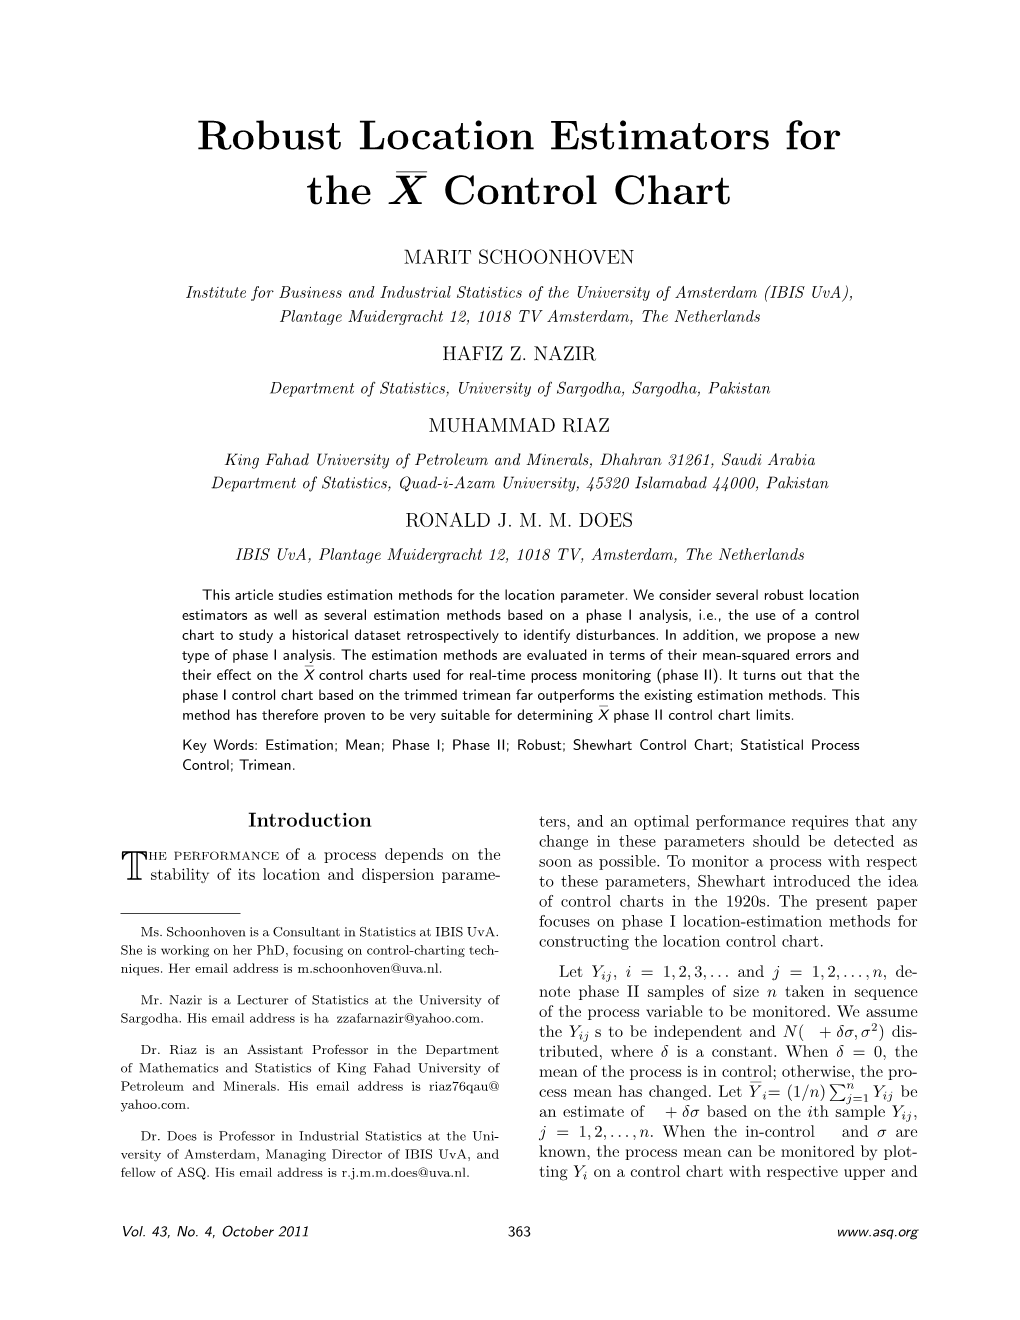 Robust Location Estimators for the X Control Chart